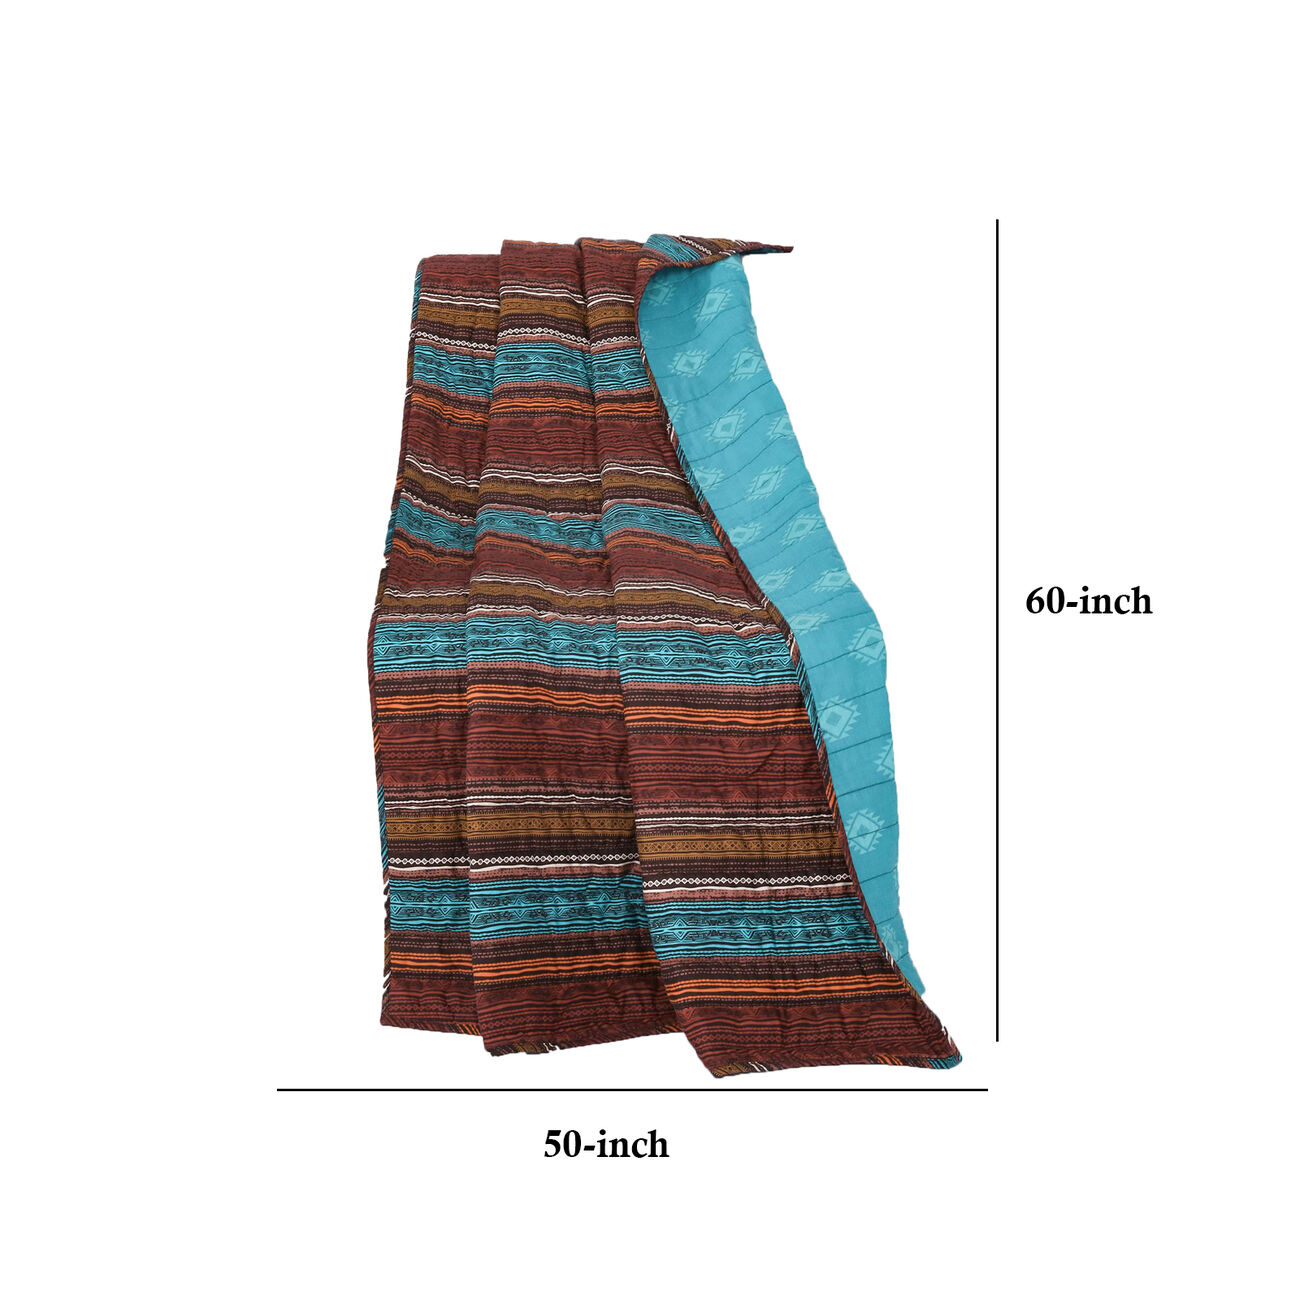 Oka Fabric Throw Blanket with Striped Pattern, Brown and Orange